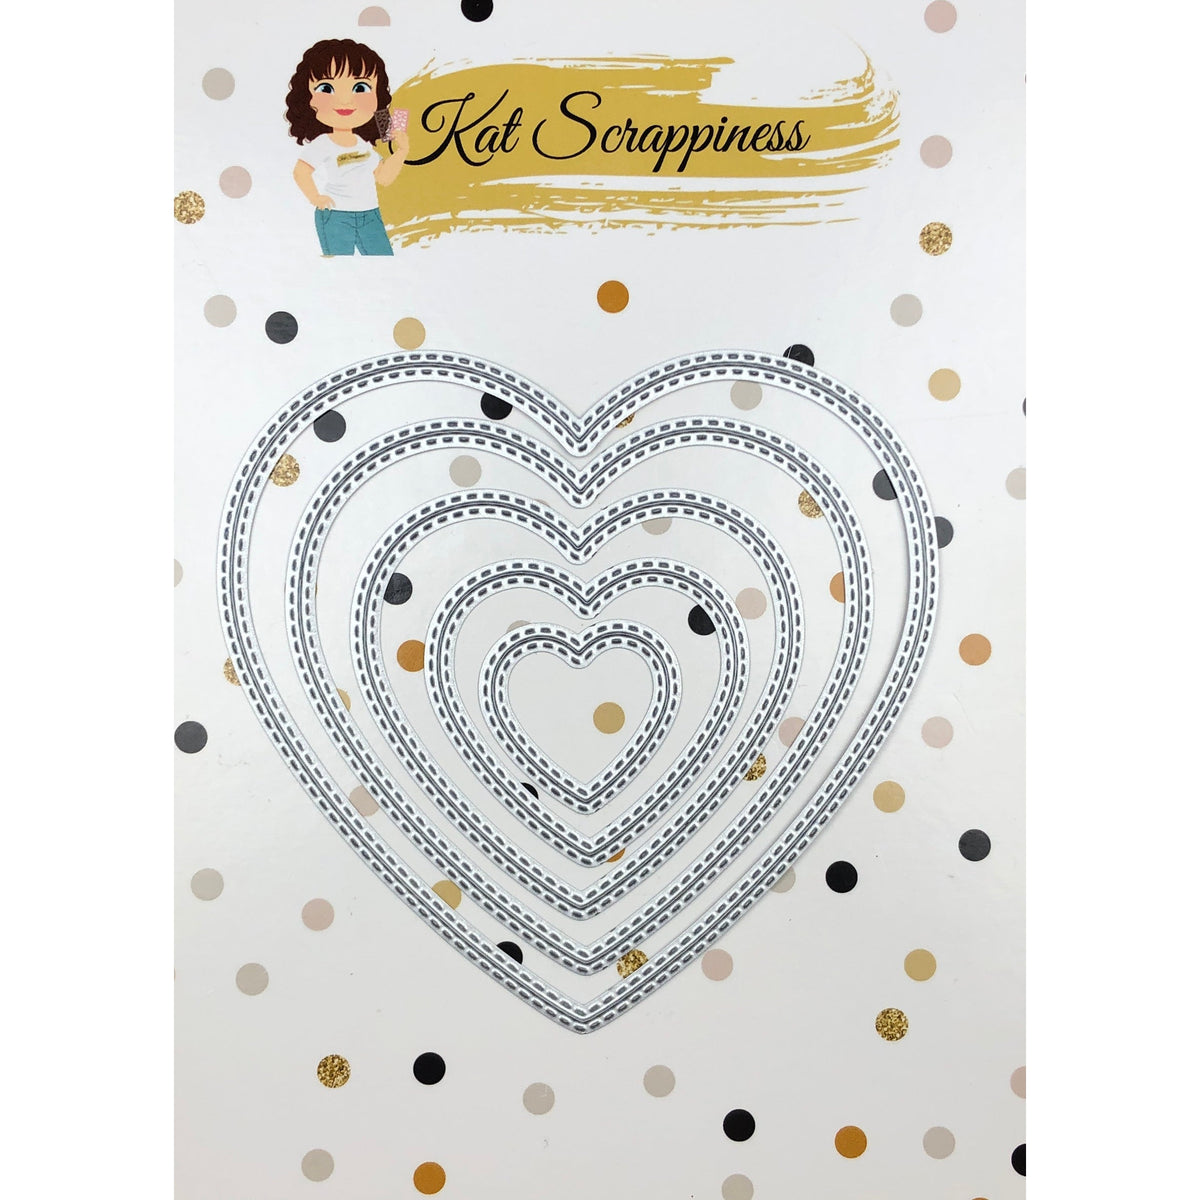 Double Stitched Heart Dies by Kat Scrappiness - Kat Scrappiness